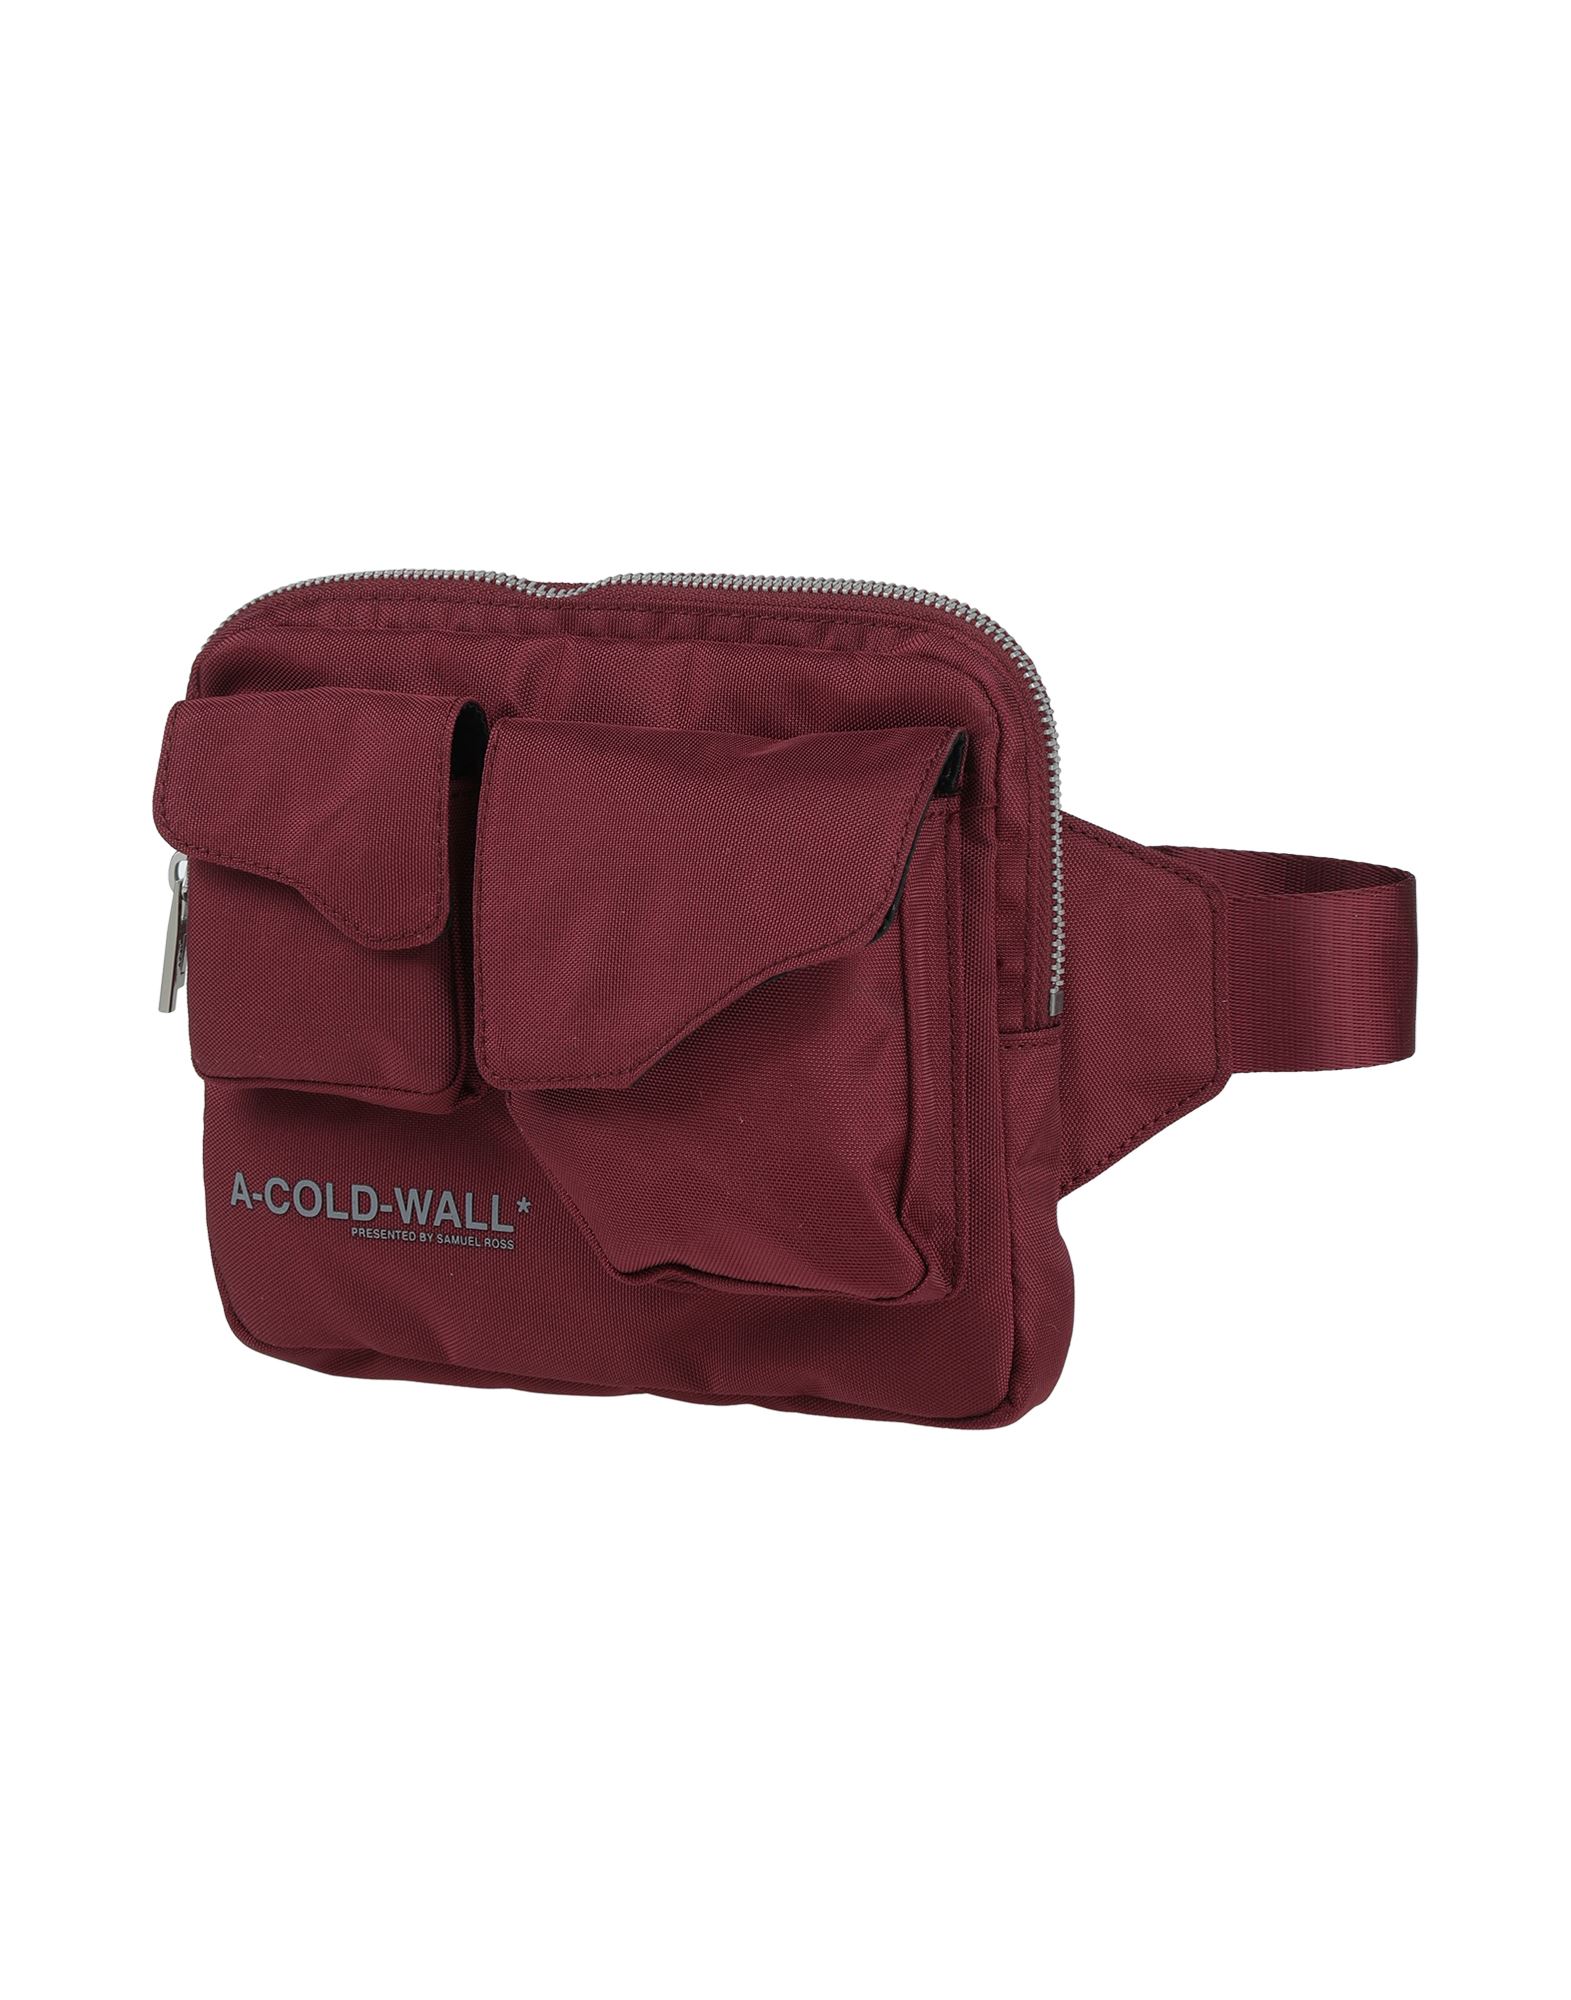 A-COLD-WALL* * BACKPACKS & FANNY PACKS,45575419ES 1